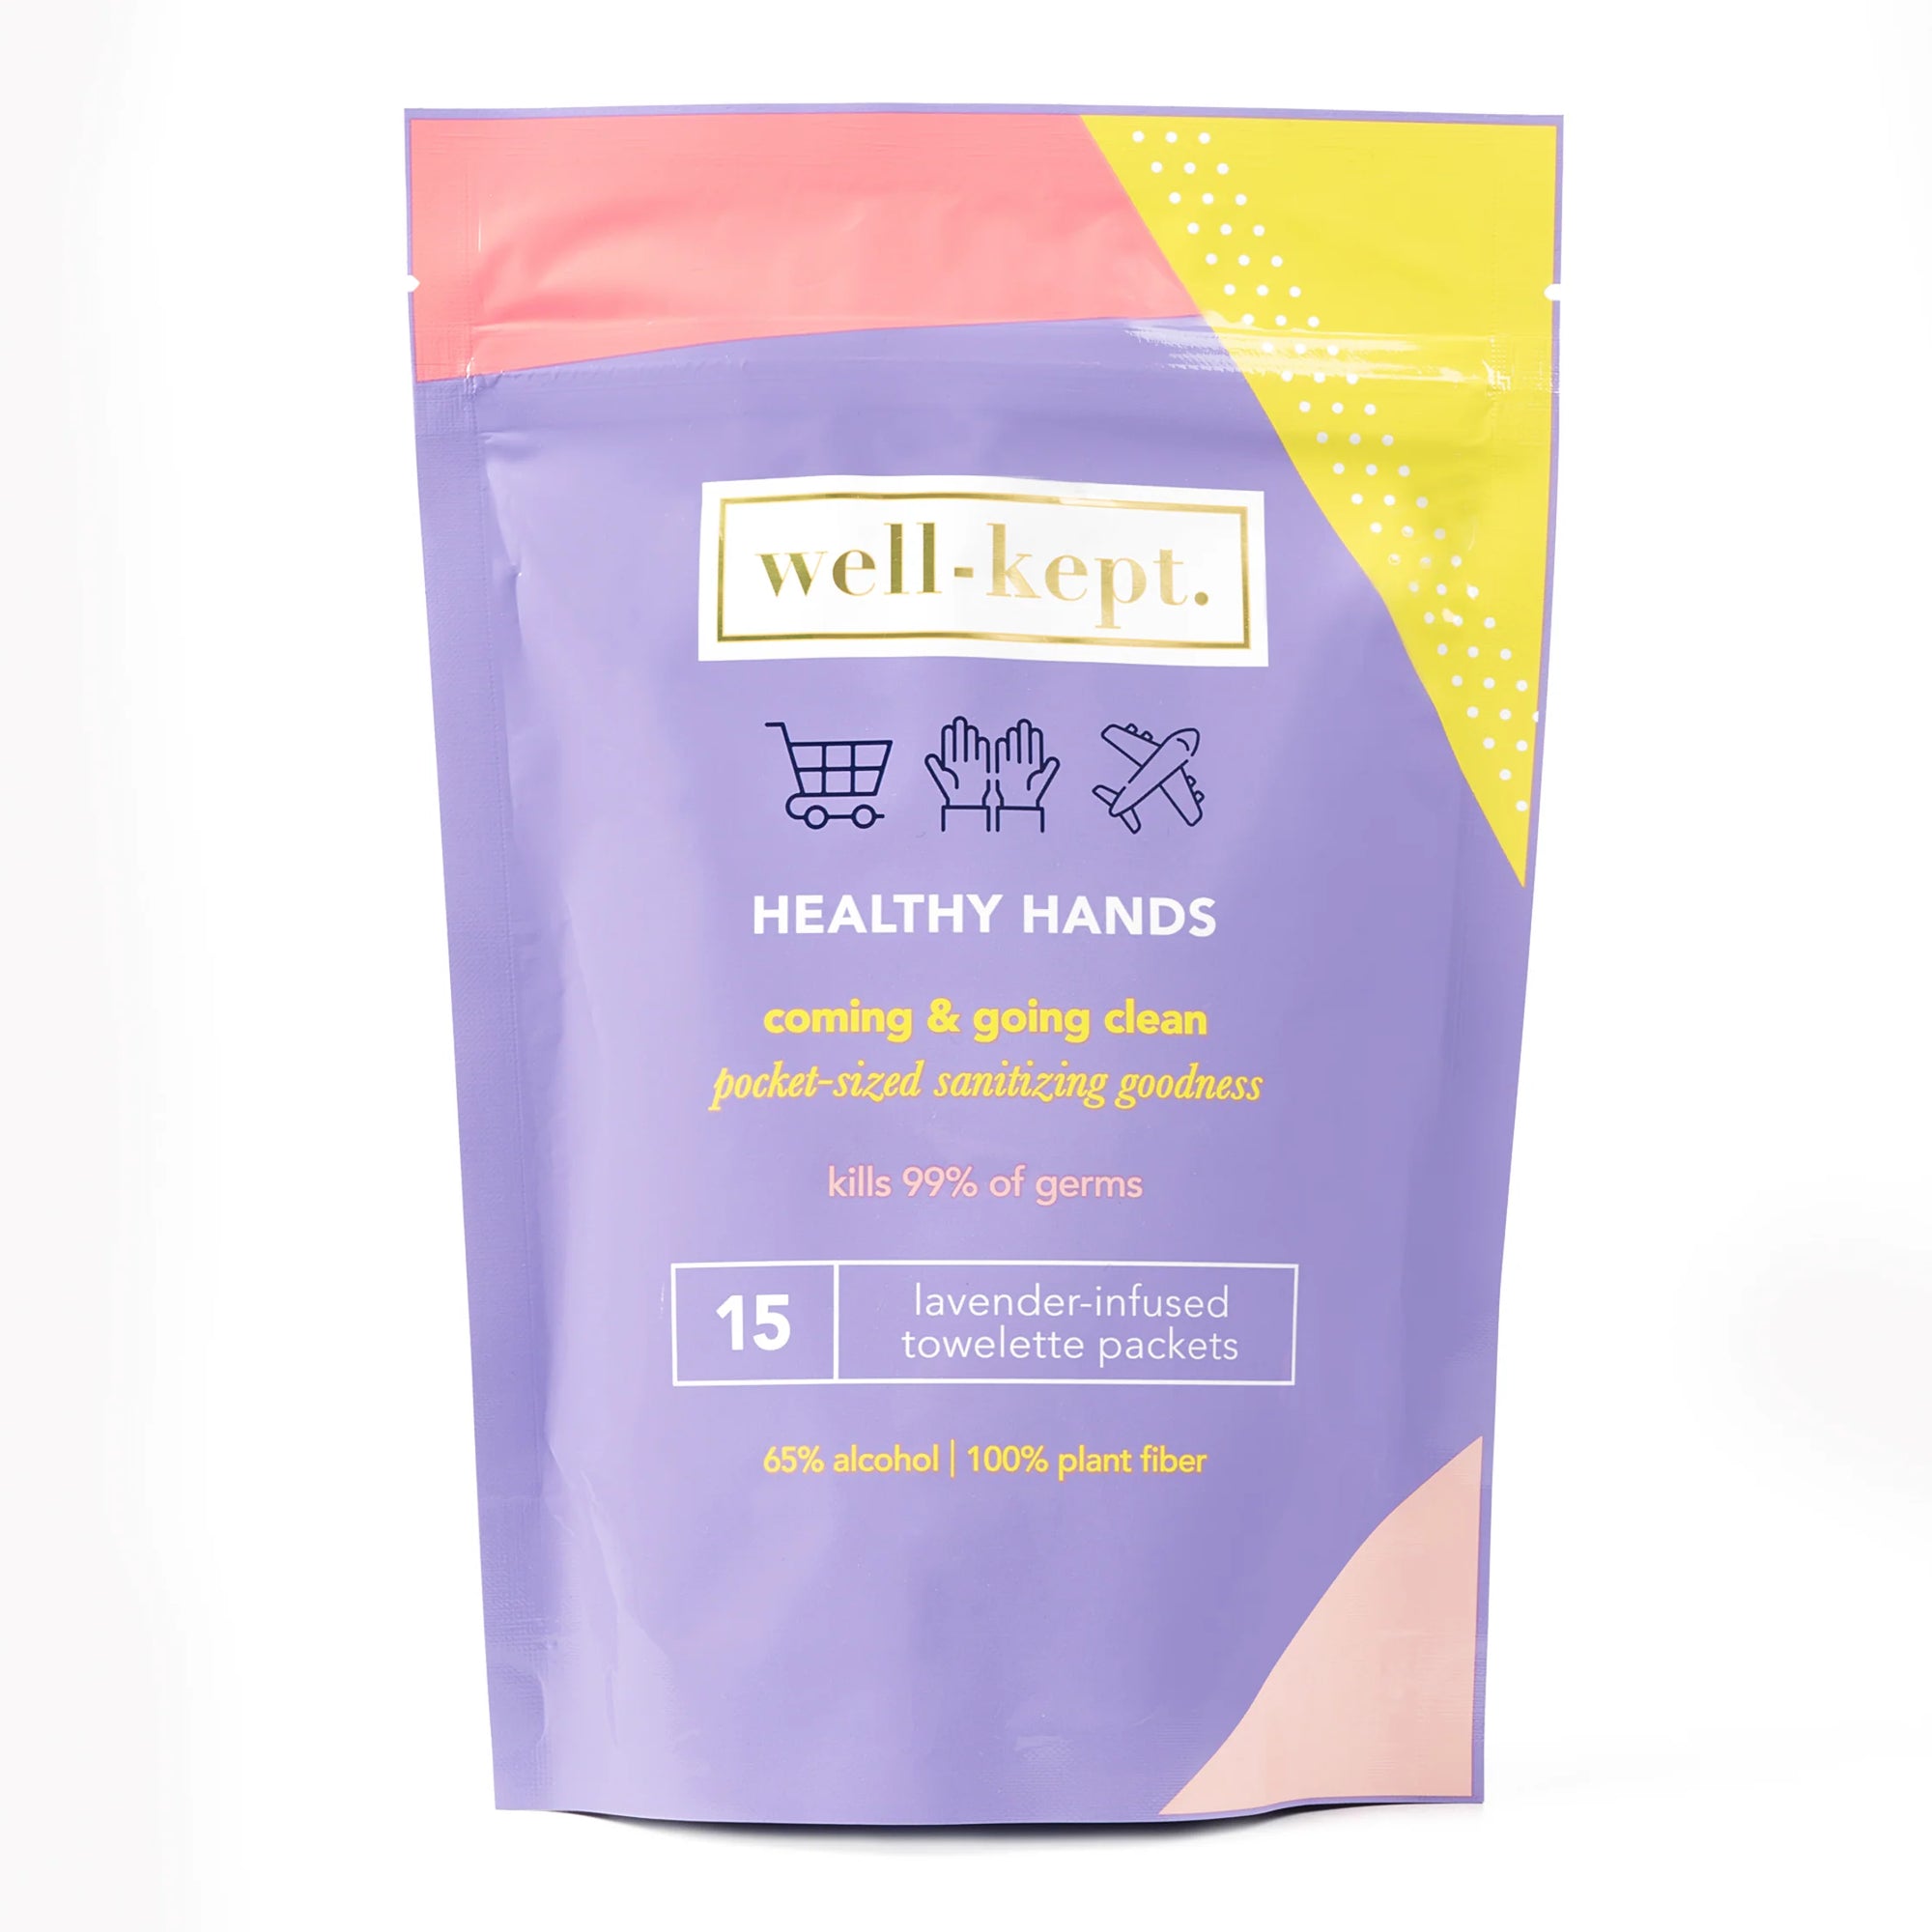 Healthy Hands Pocket Sanitizing Wipes - The Preppy Bunny